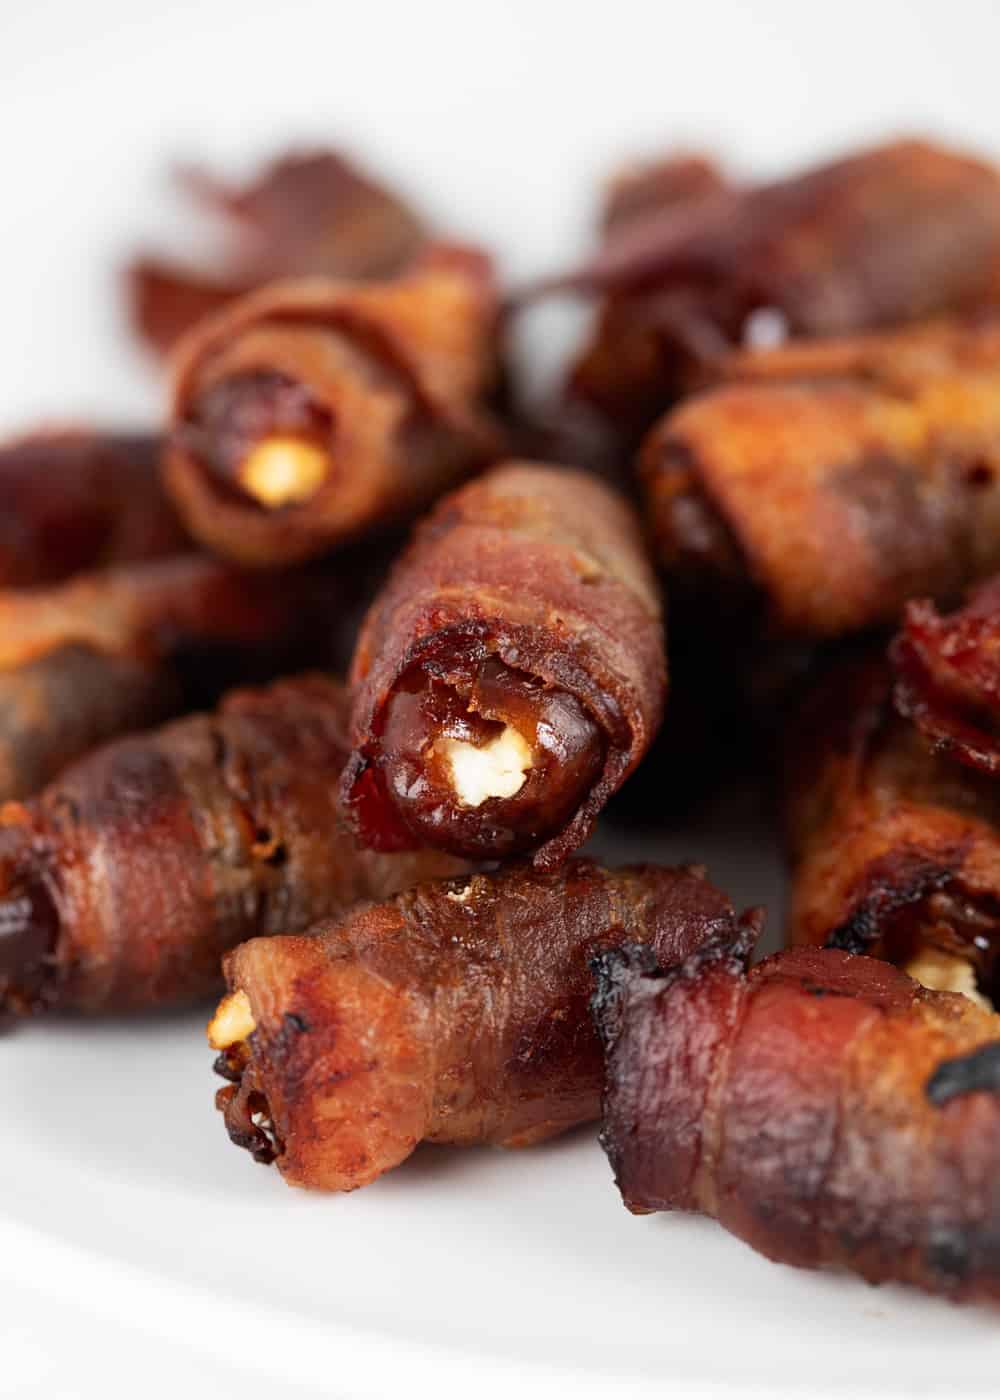 Bacon-wrapped dates on a plate.